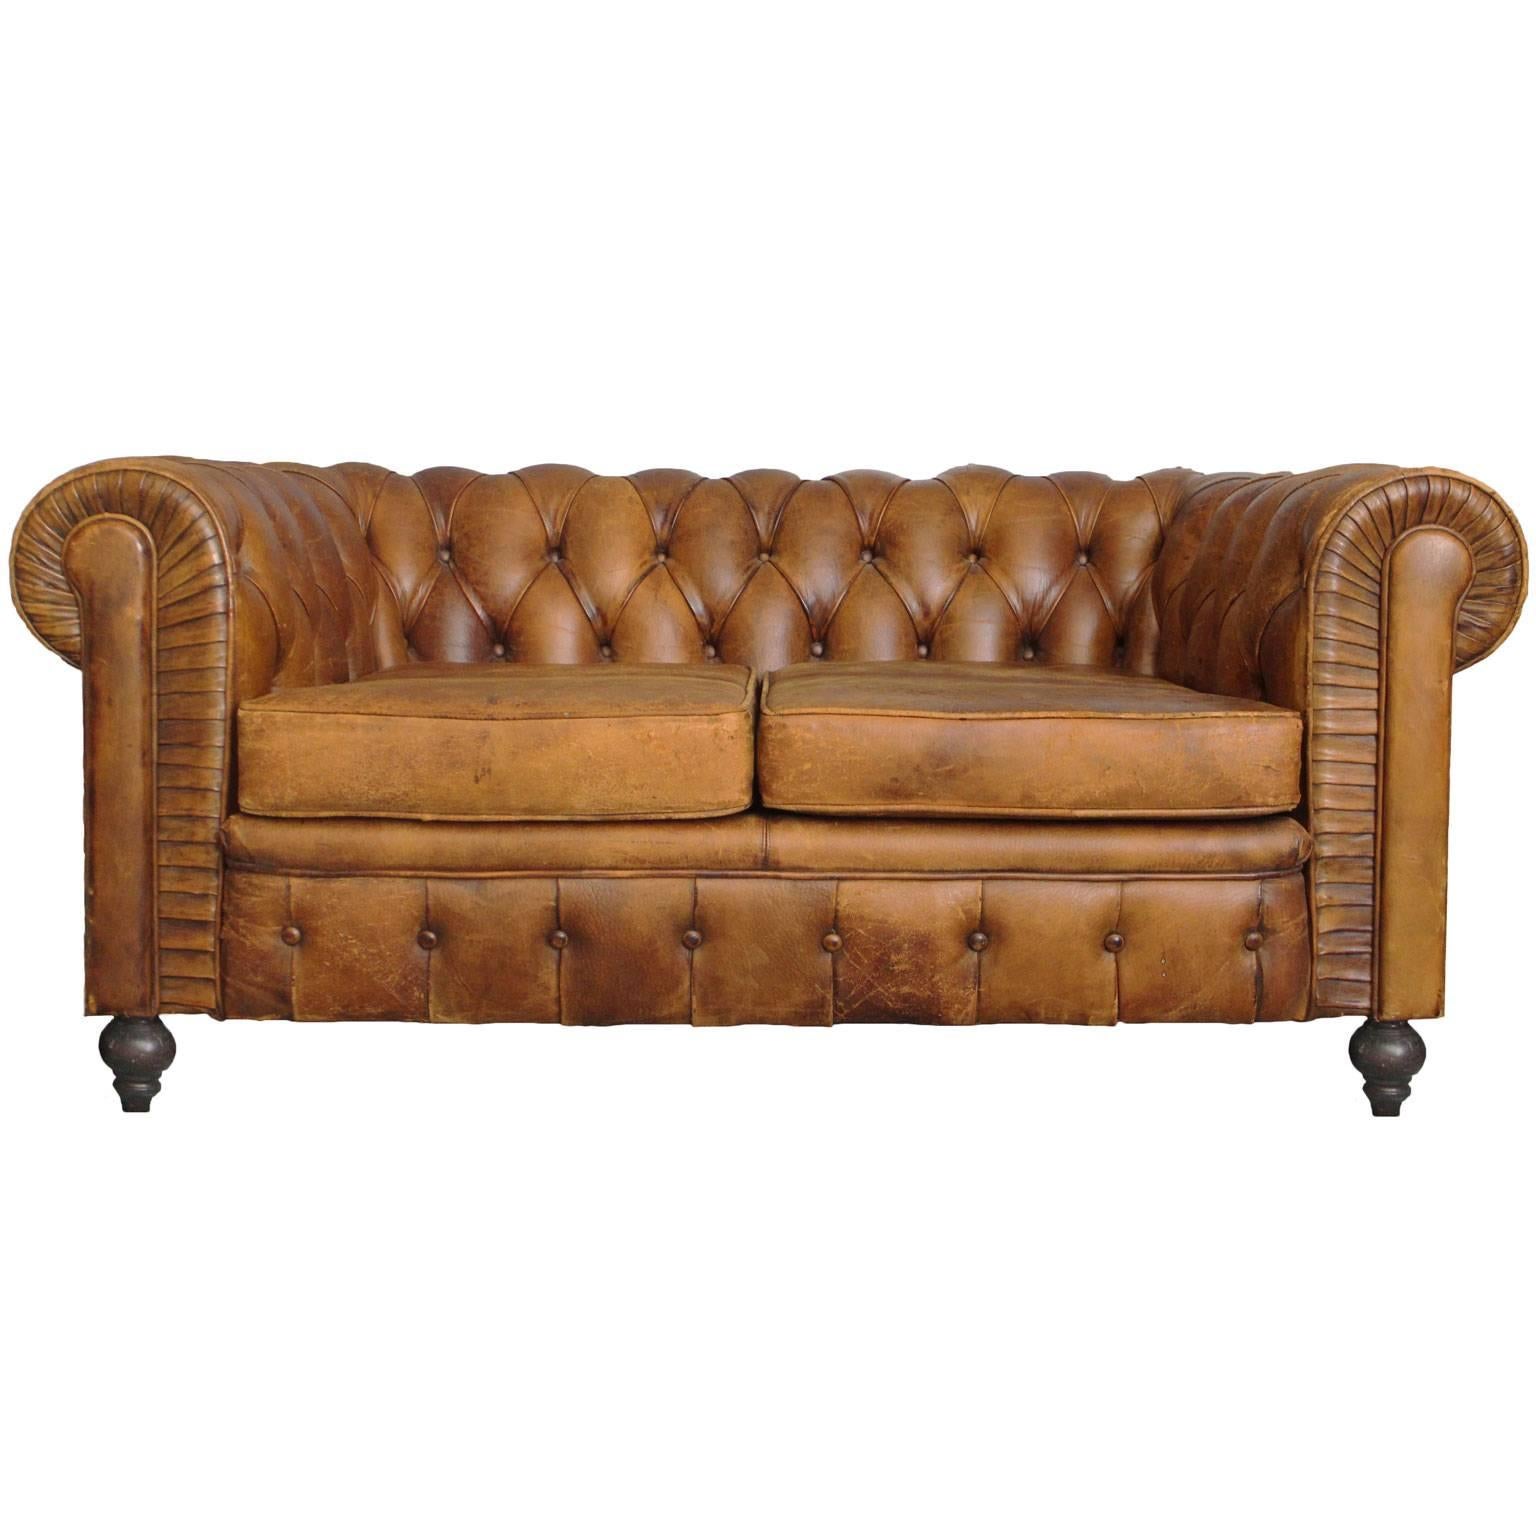 Leather Chesterfield loveseat.